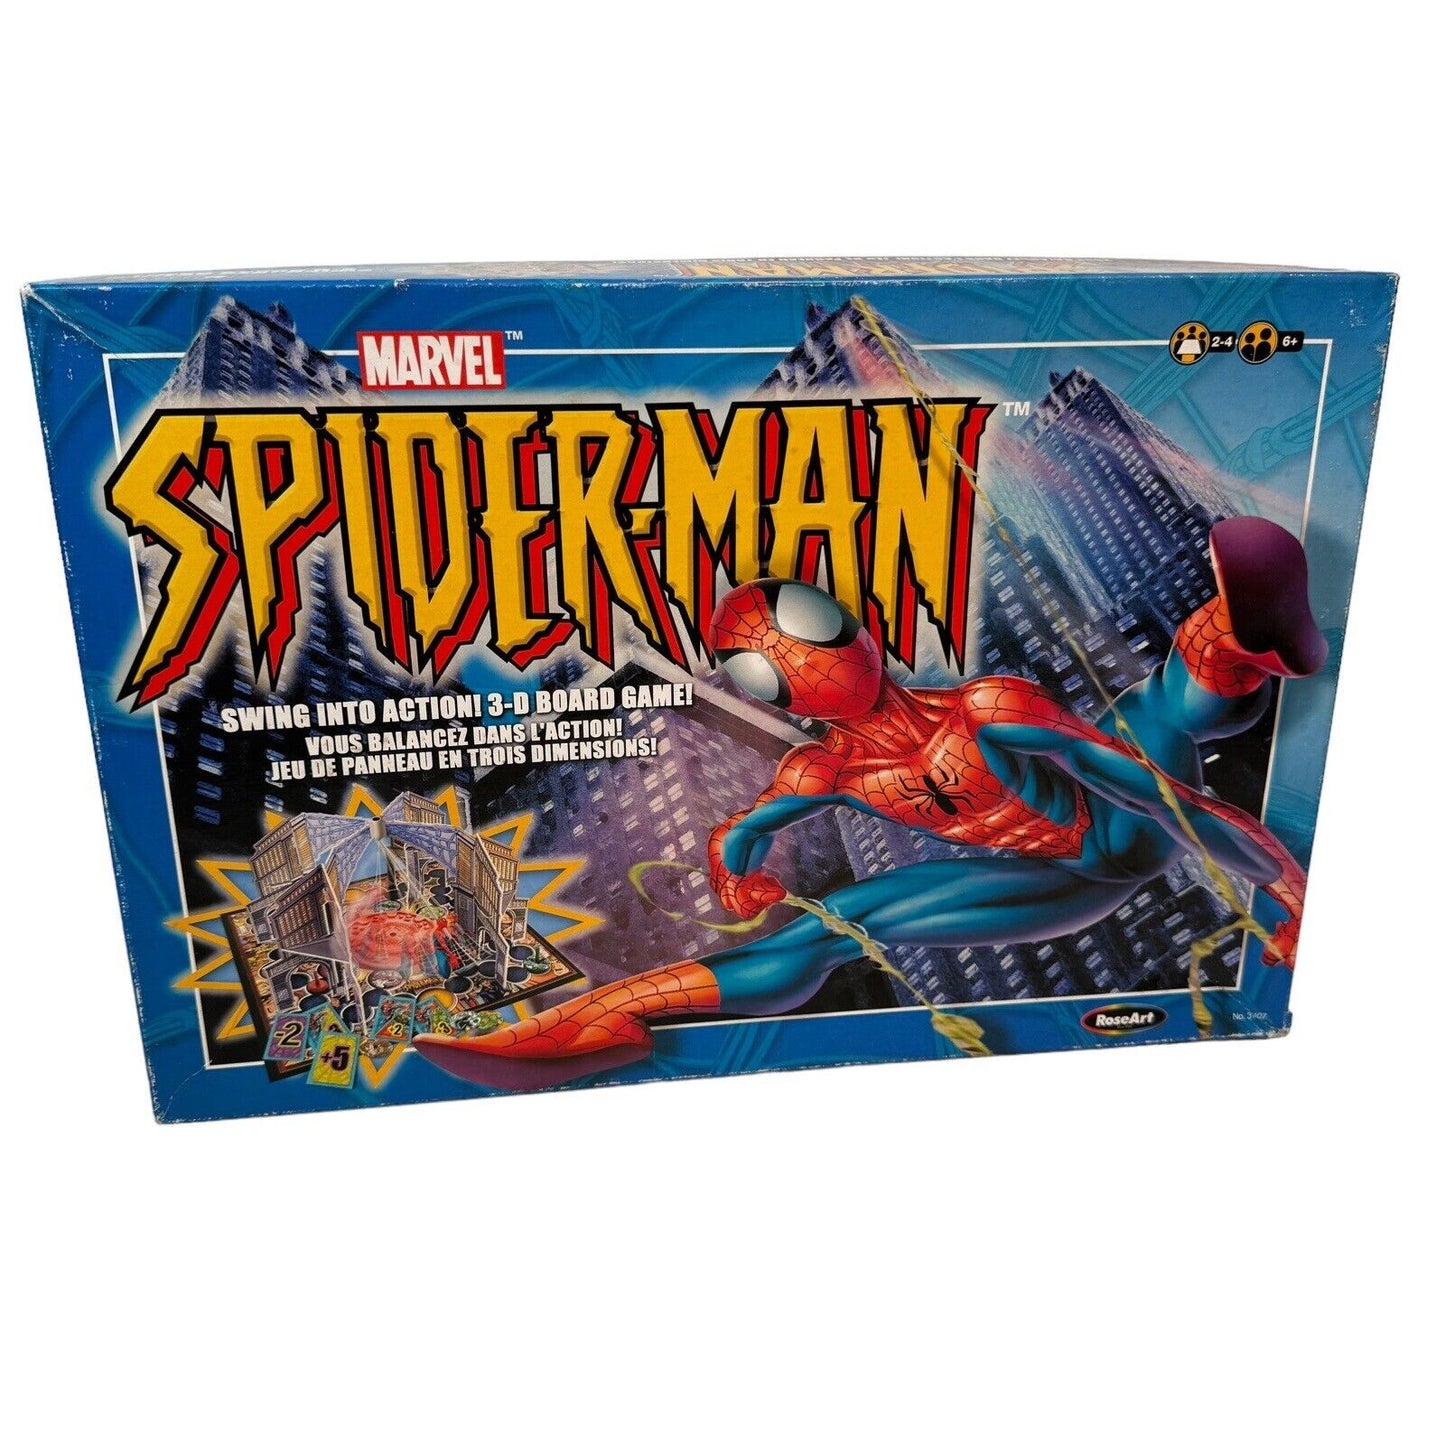 2003 Spider-Man Swing into Action Game by RoseArt Complete RARE New In Open Box